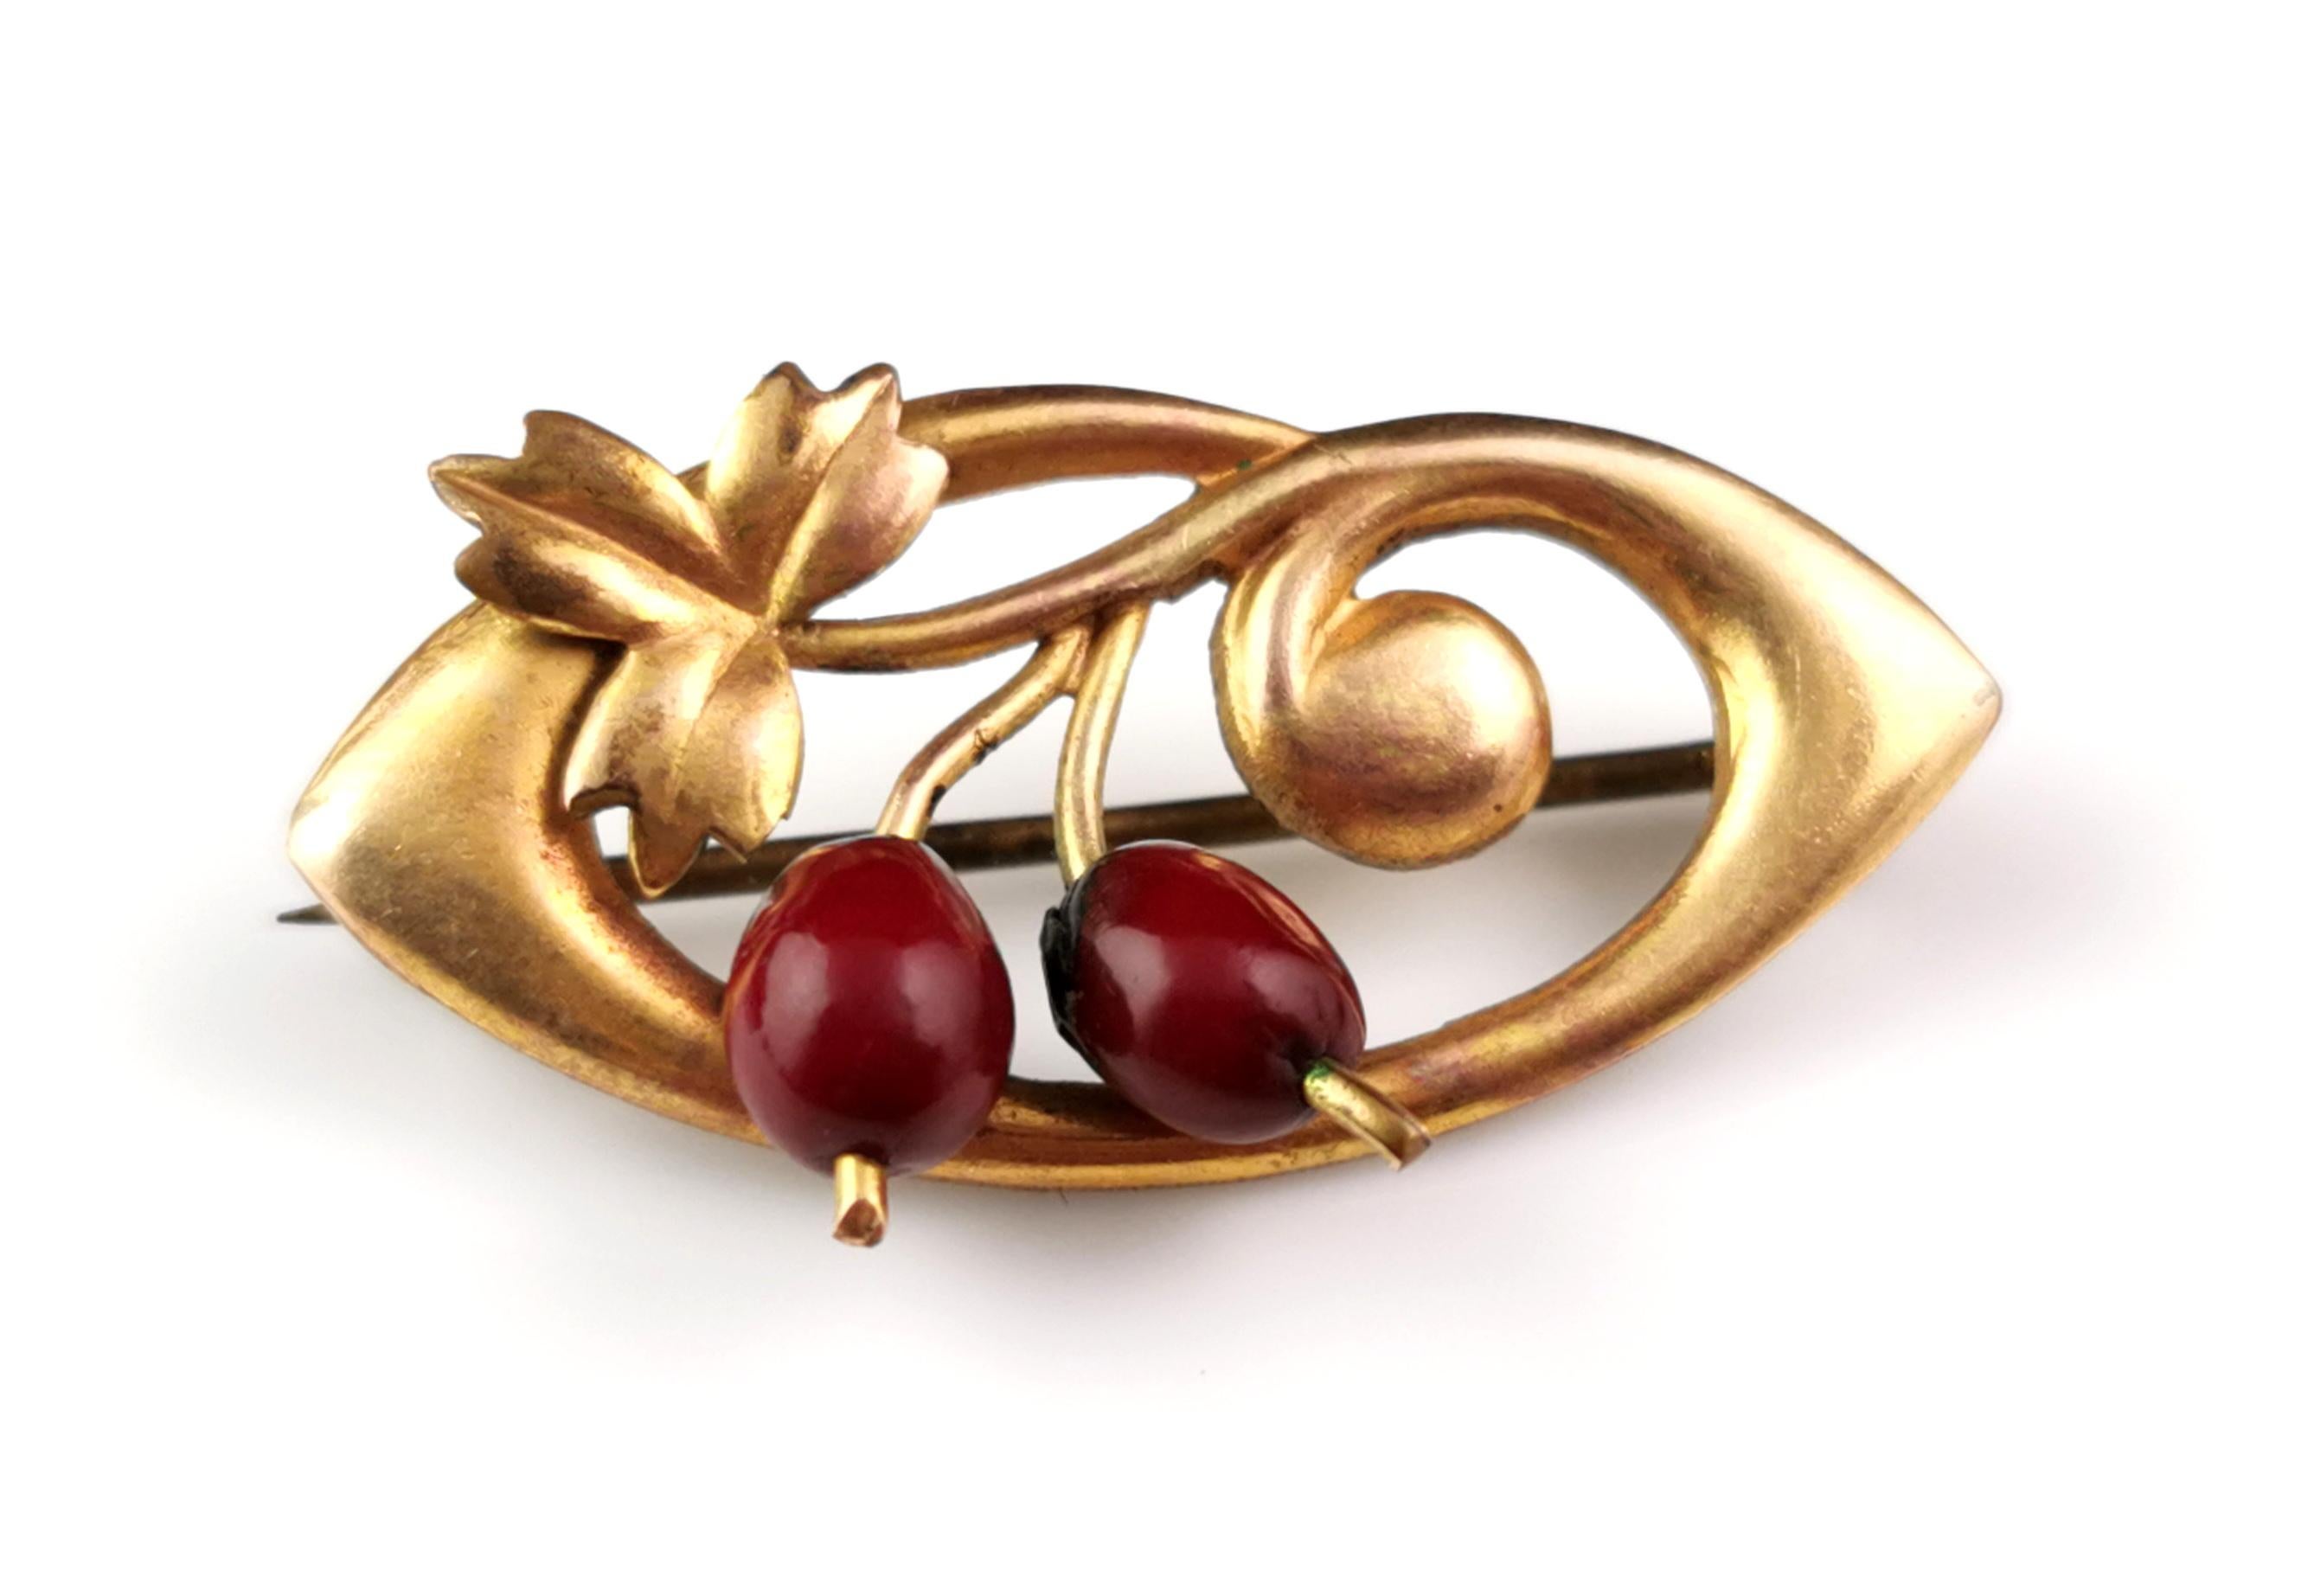 A charming antique Art Nouveau berry brooch.

It is crafted from a rich golden gilt metal and is an ellipse shape with a scrolling leaf design, to the base of the brooch there are two red applied 'berries' made from a rich red early plastic.

The